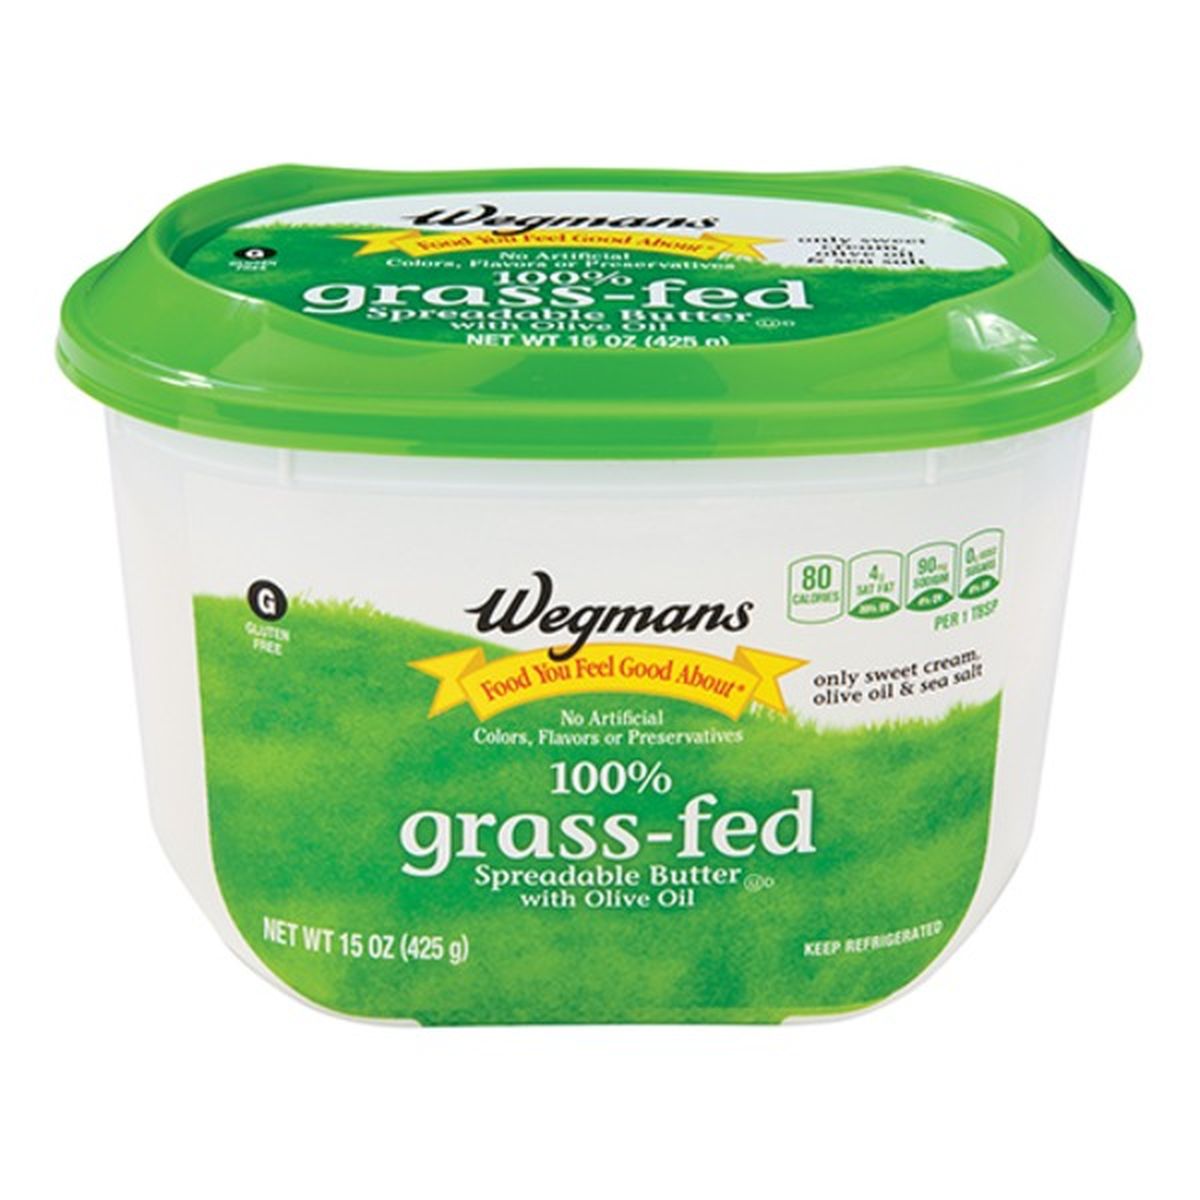 Calories in Wegmans Grass Fed Spreadable Butter With Olive Oil